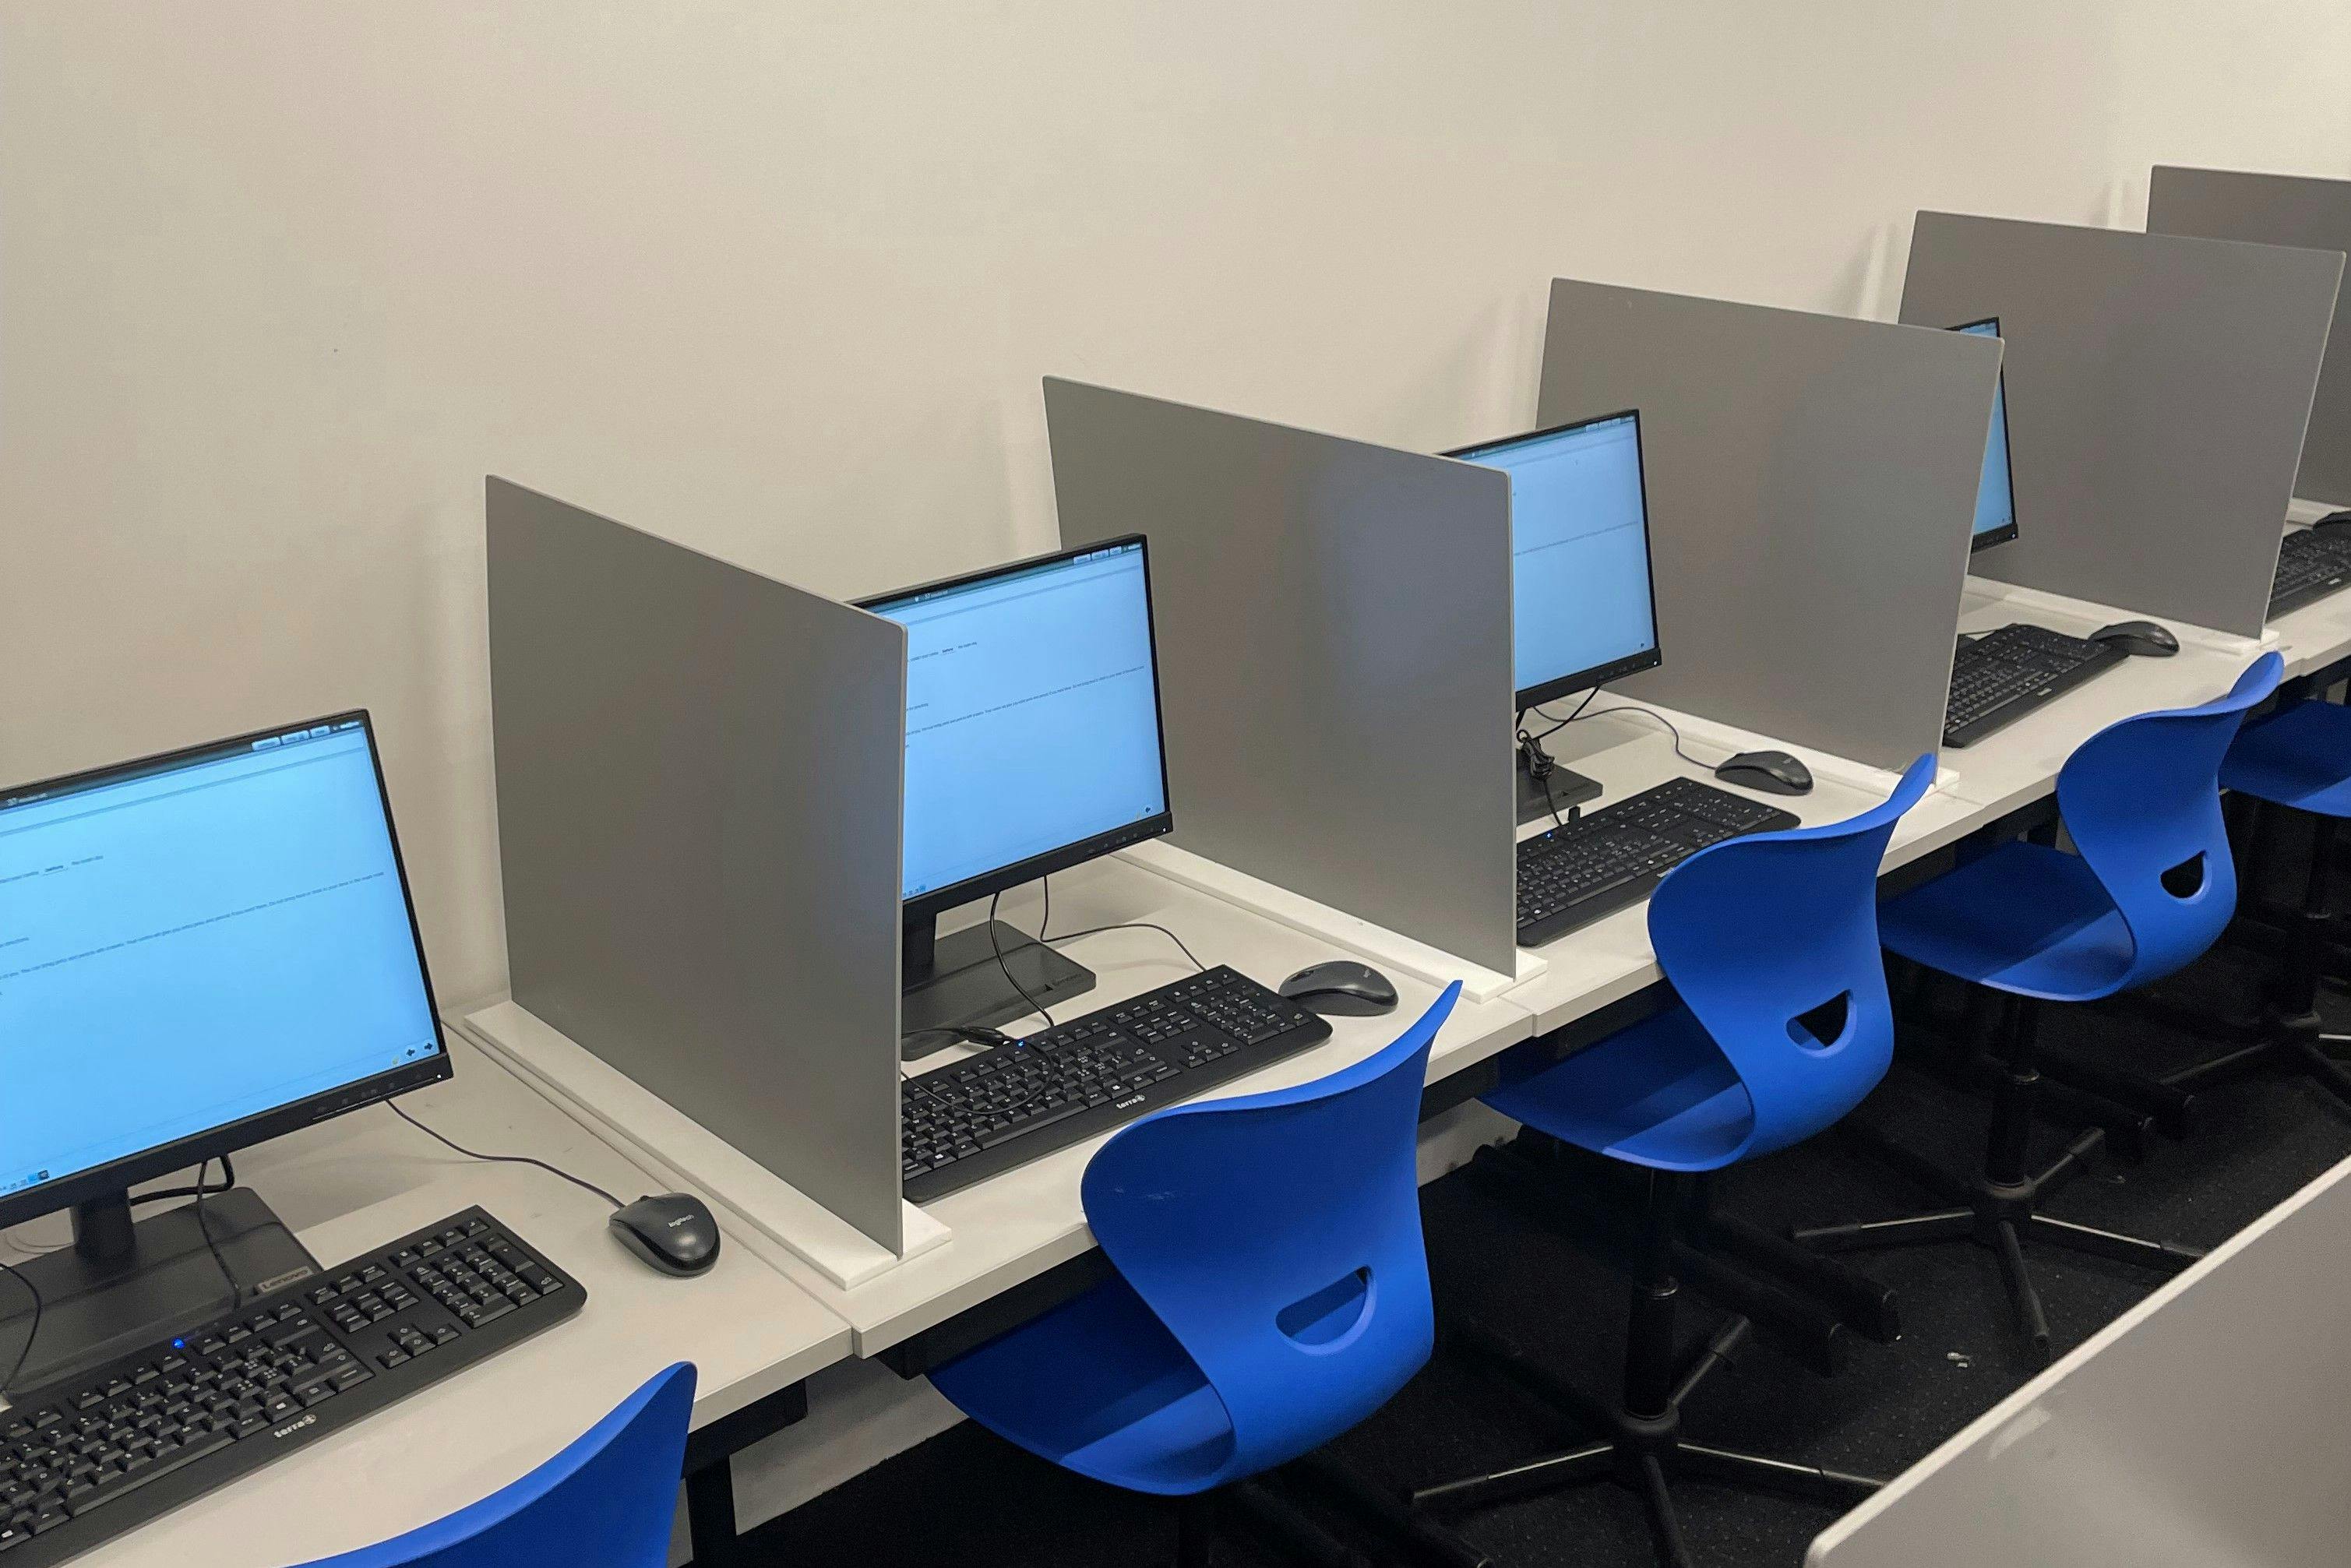 Four blue chairs in front of computers with keyborads, mouse and headphones. All computer are turned on for the tcf exam taking place in this exam room.